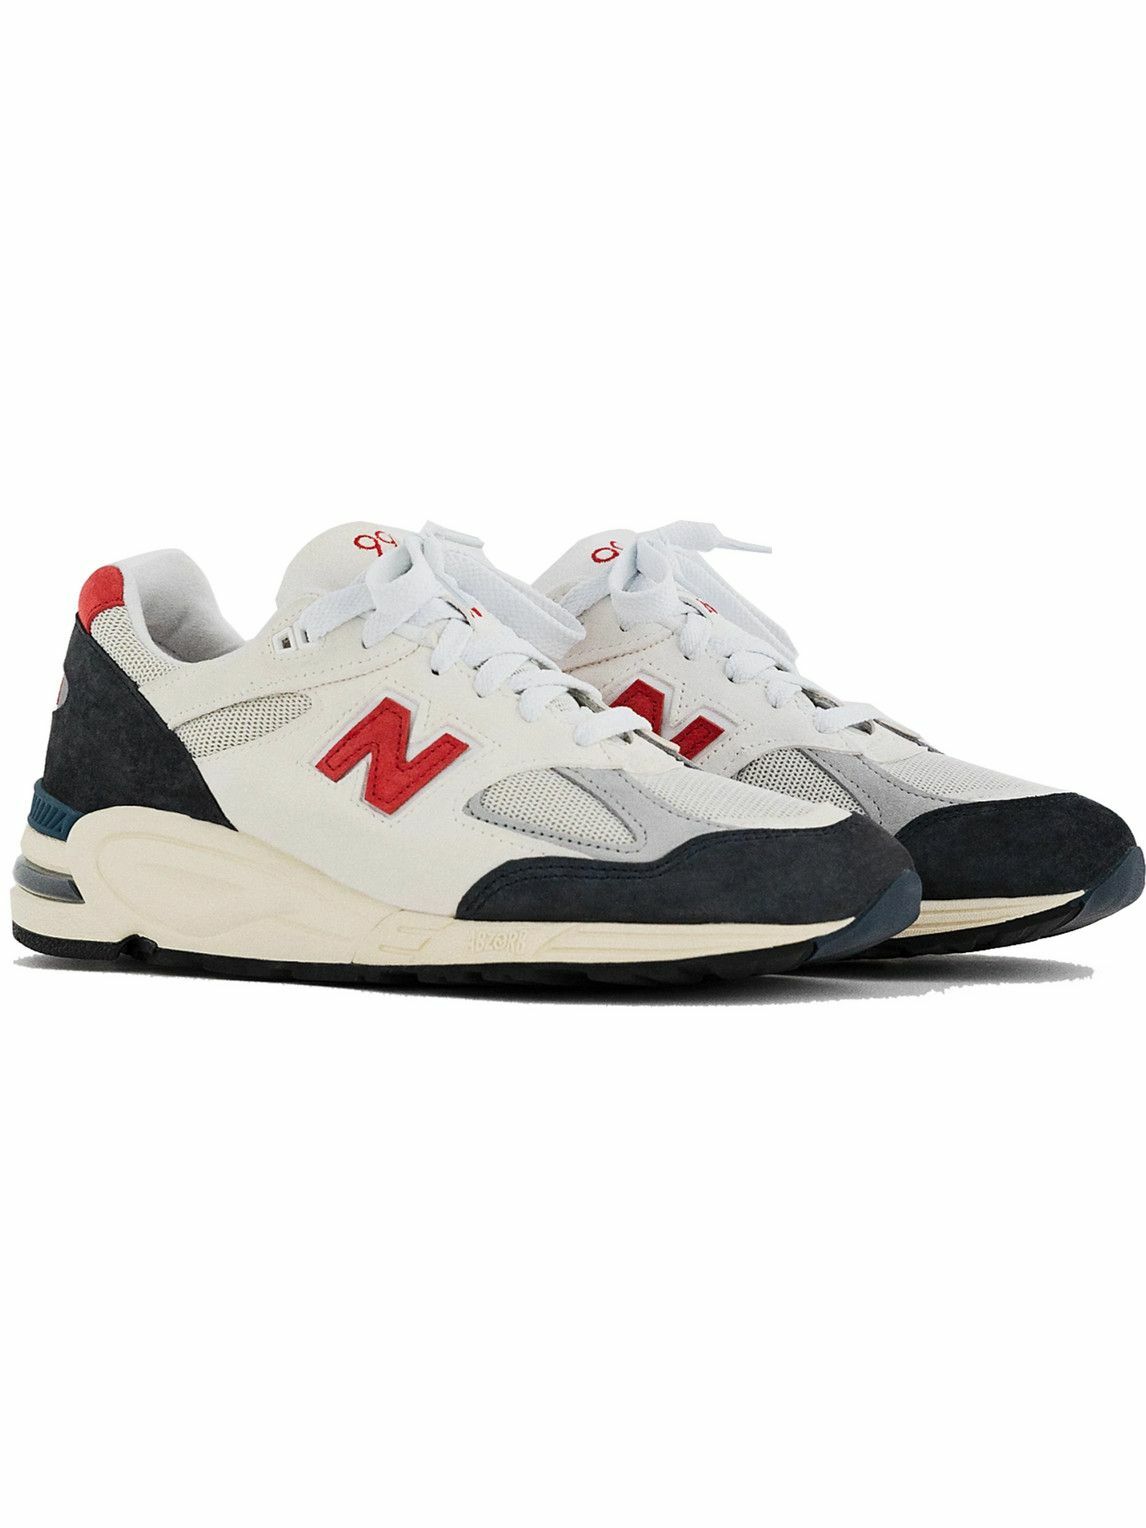 New Balance - Teddy Santis 990v2 Suede and Mesh Sneakers - White